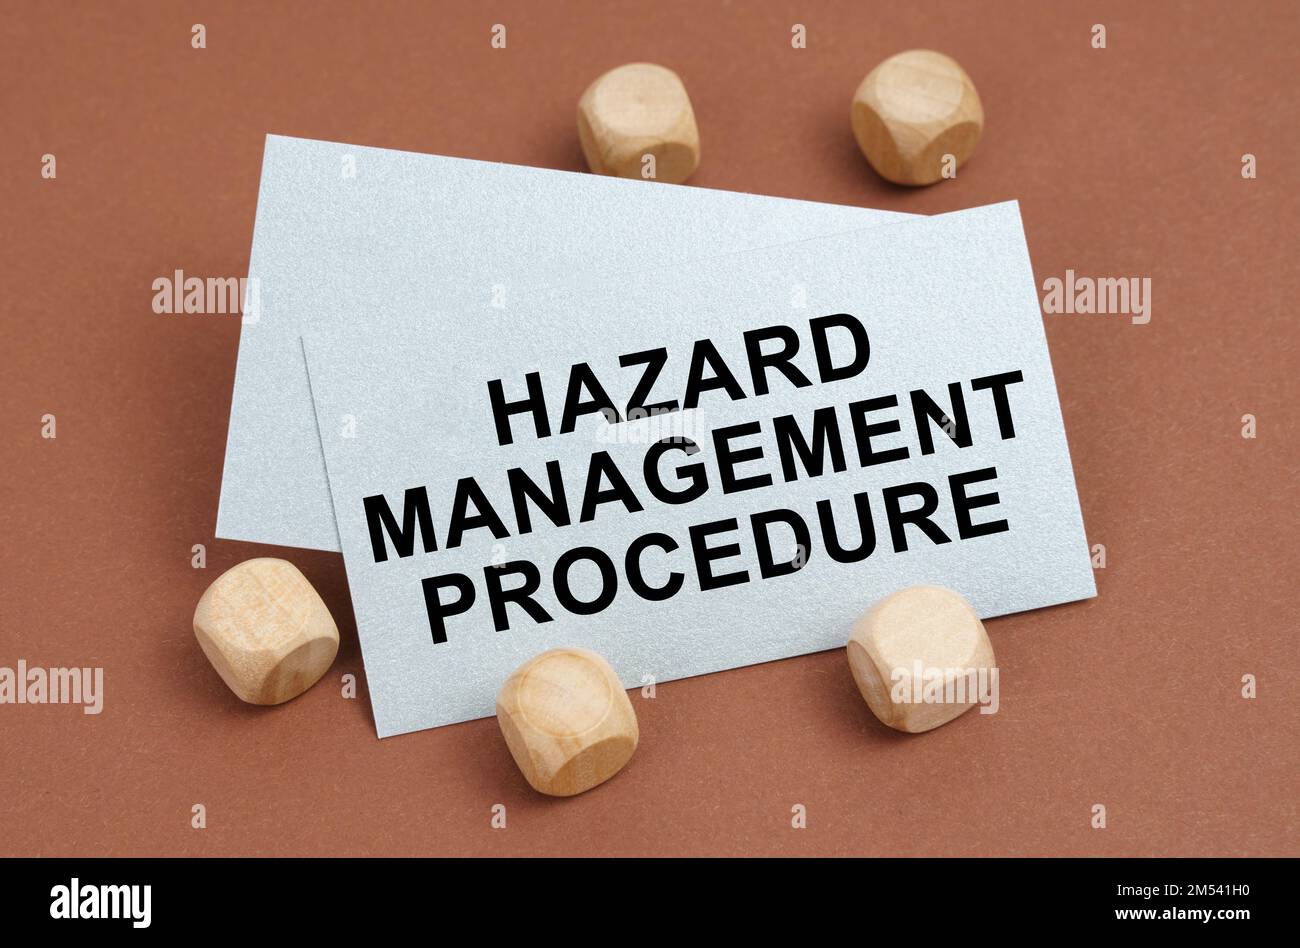 The concept of industrial safety. On a brown surface, wooden cubes and a business card with the inscription - Hazard Management Procedure Stock Photo